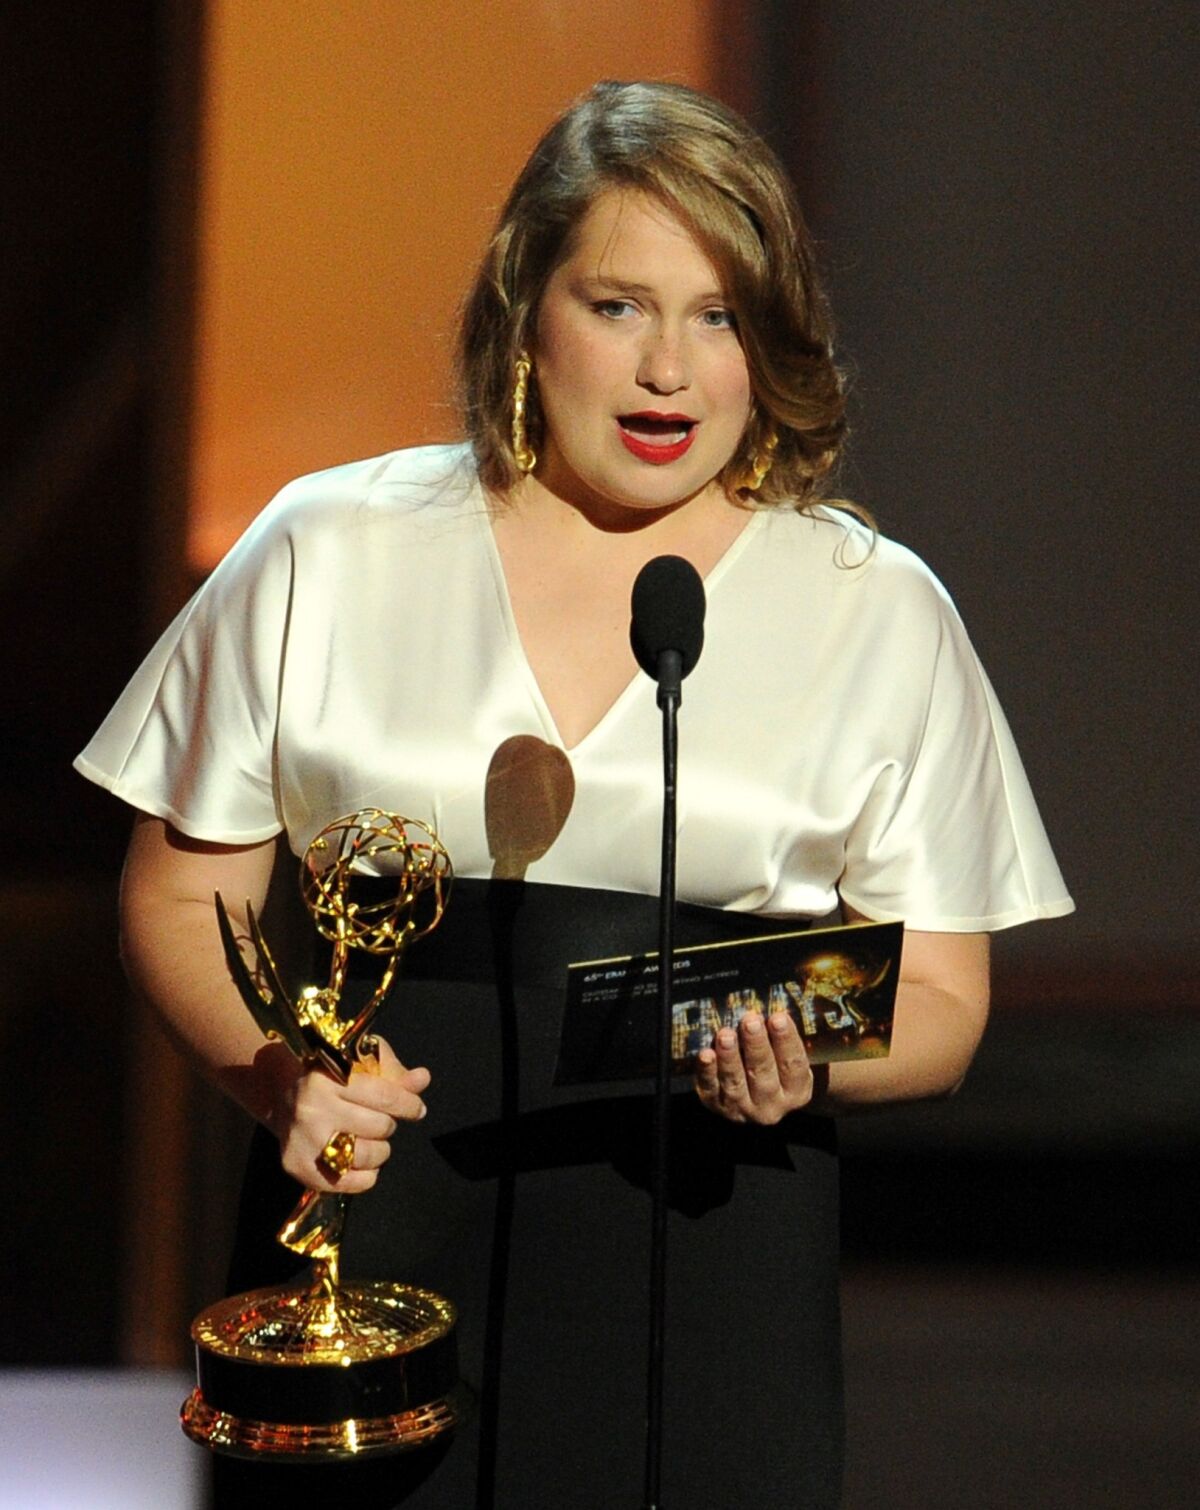 Merrit Wever from "Nurse Jackie" onstage accepting her Emmy award.